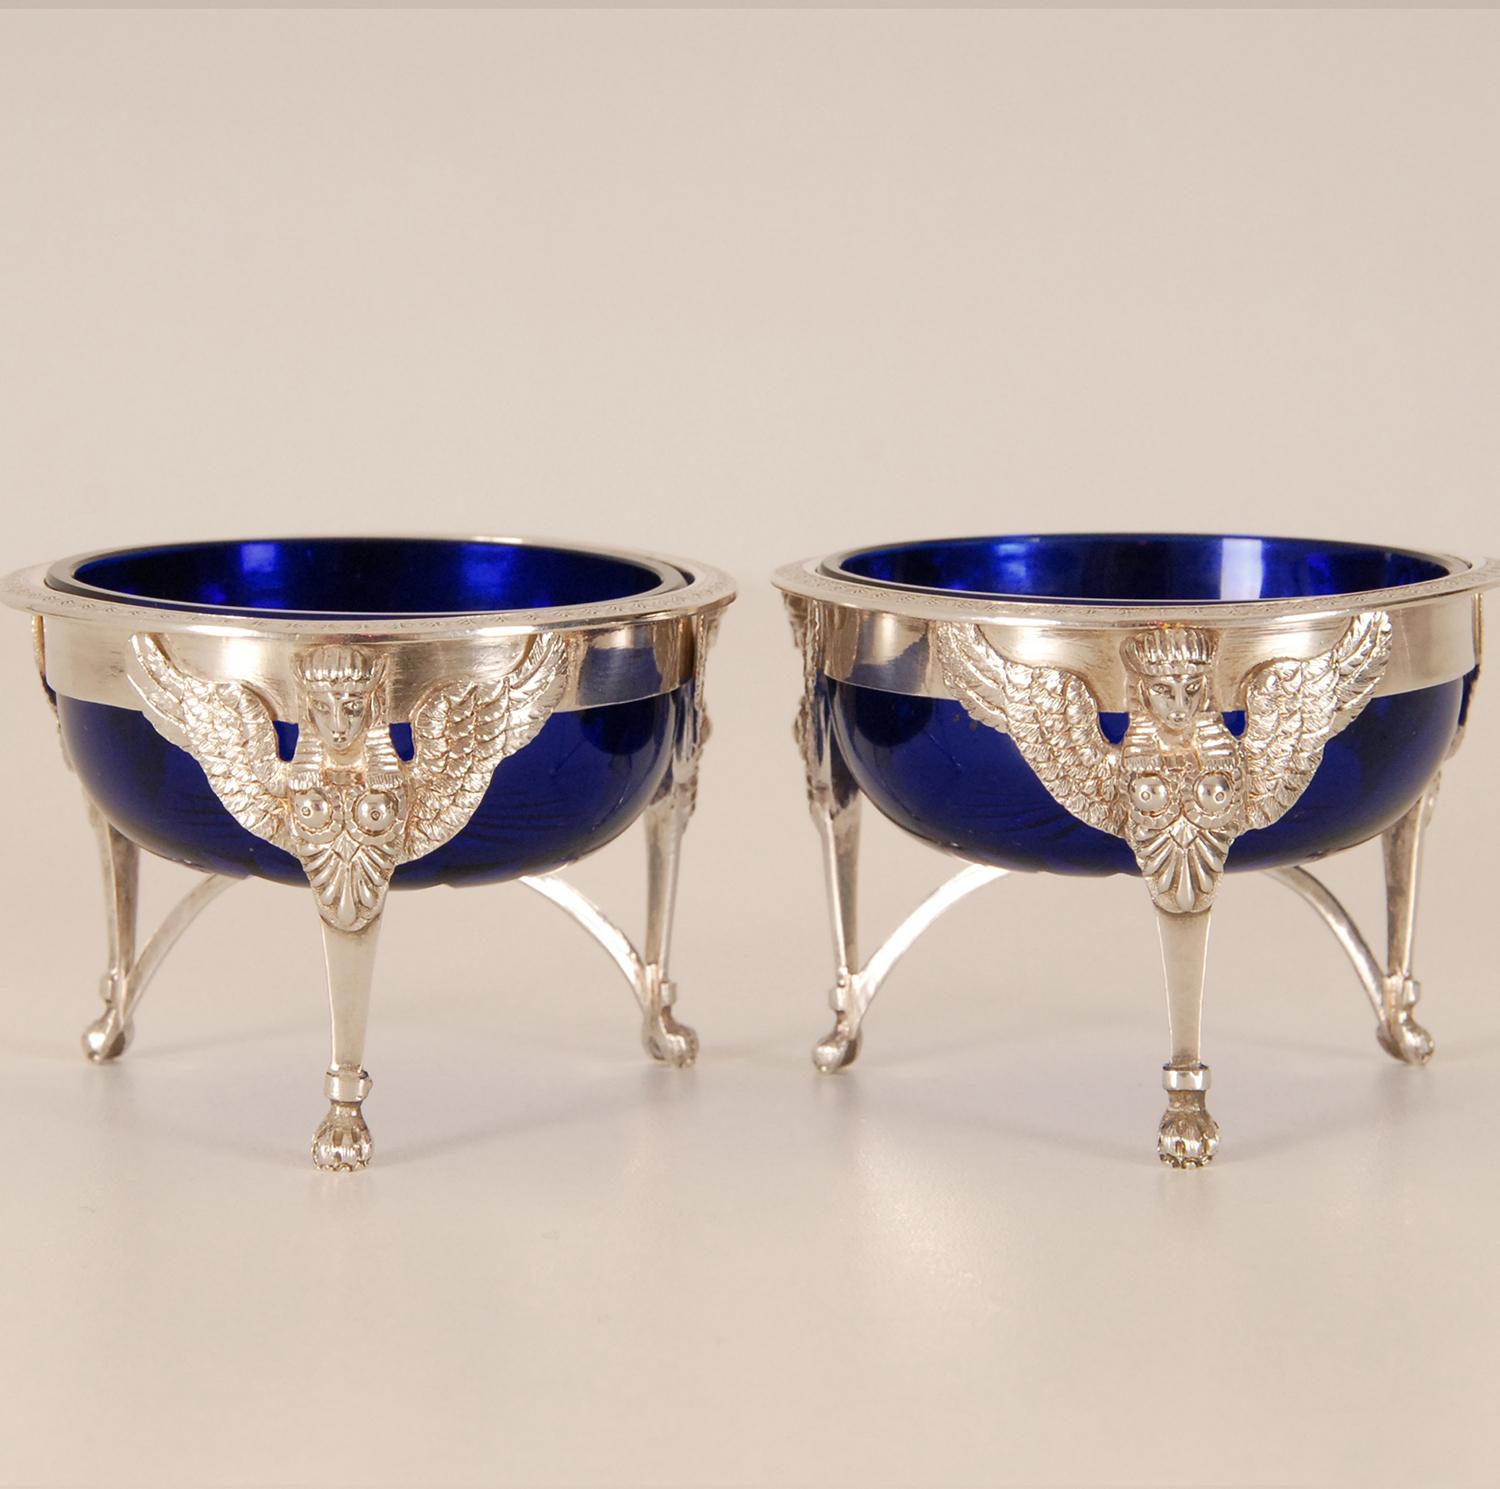 French Empire Sterling Silver Salt Cellar Blue Glass Liners Return from Egypt For Sale 2